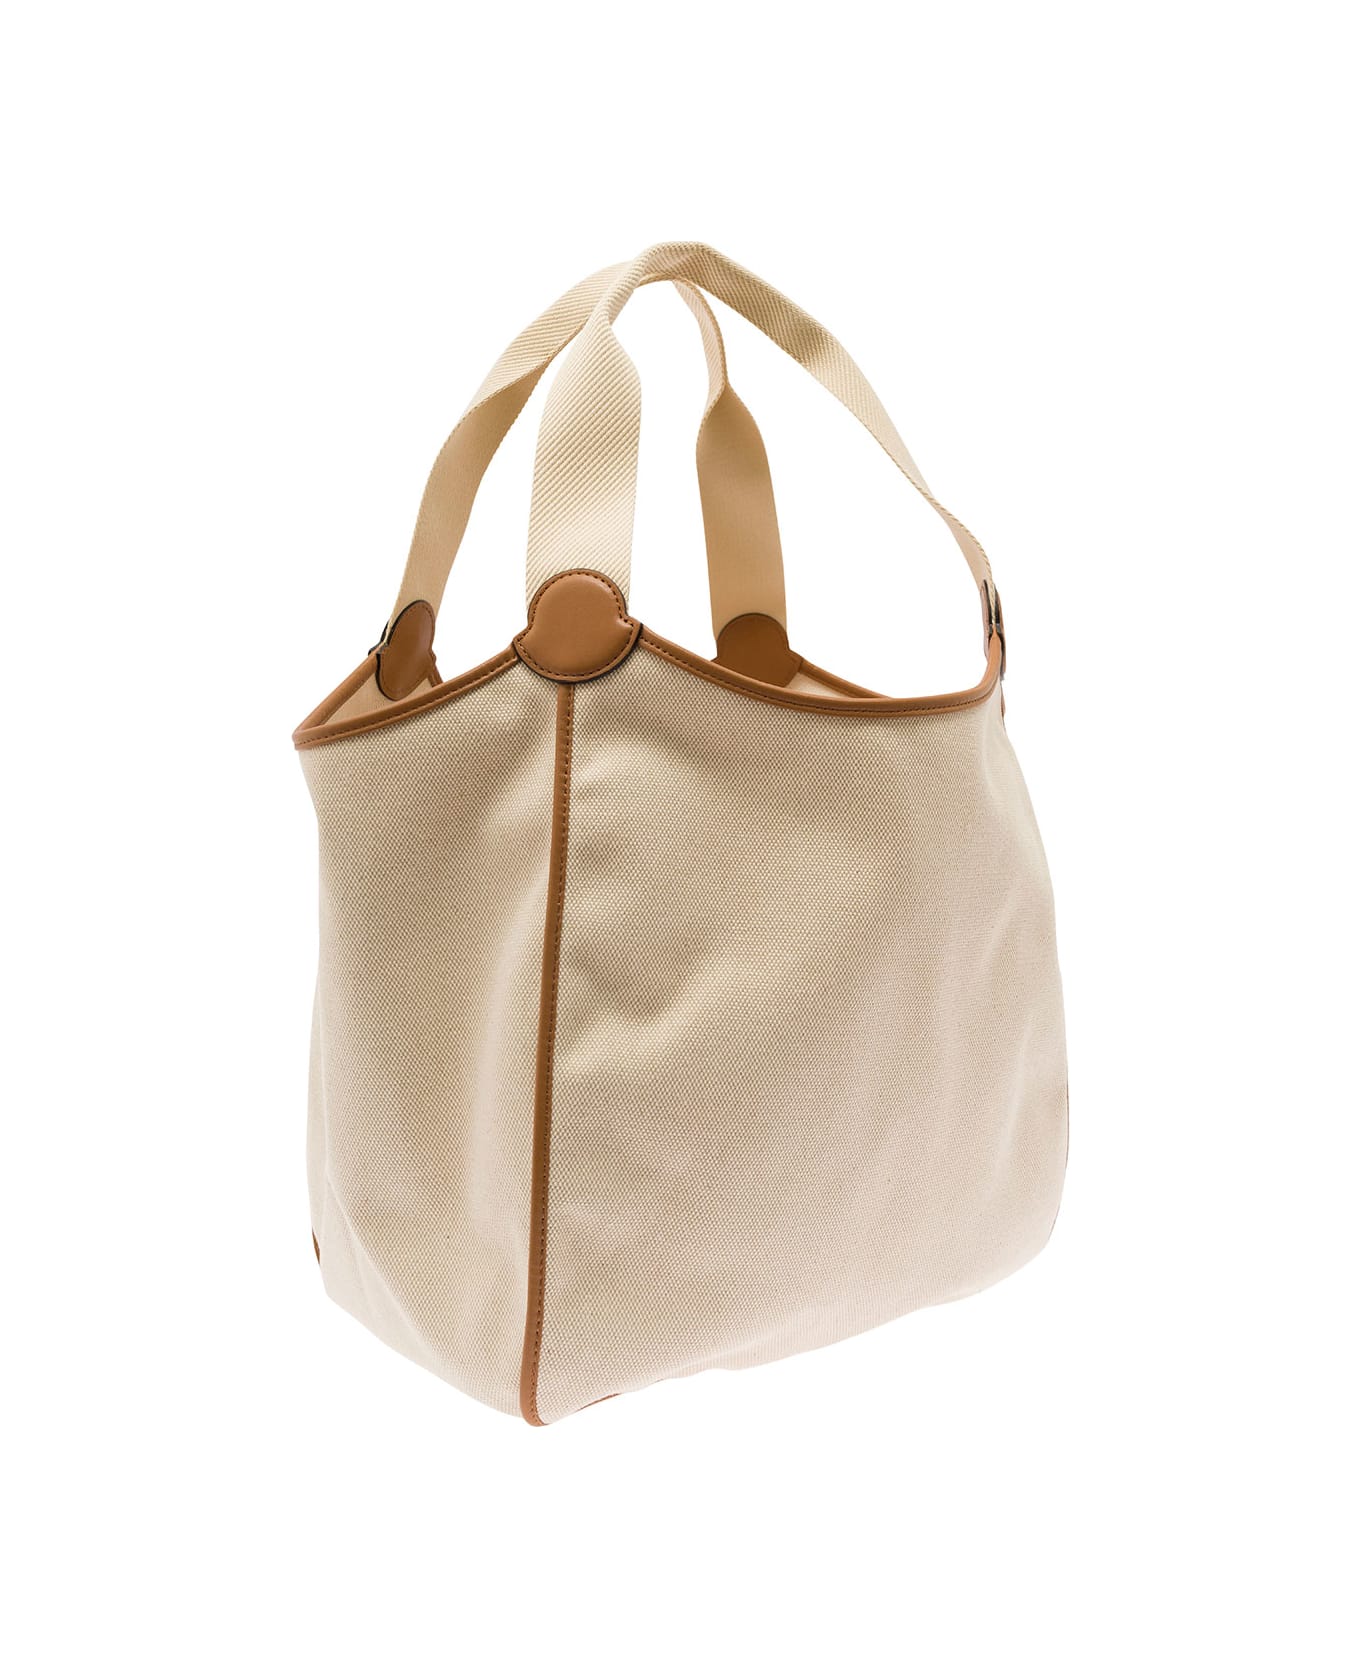 Moncler Nalani Tote Bag In Beige Canvas Woman - Beige